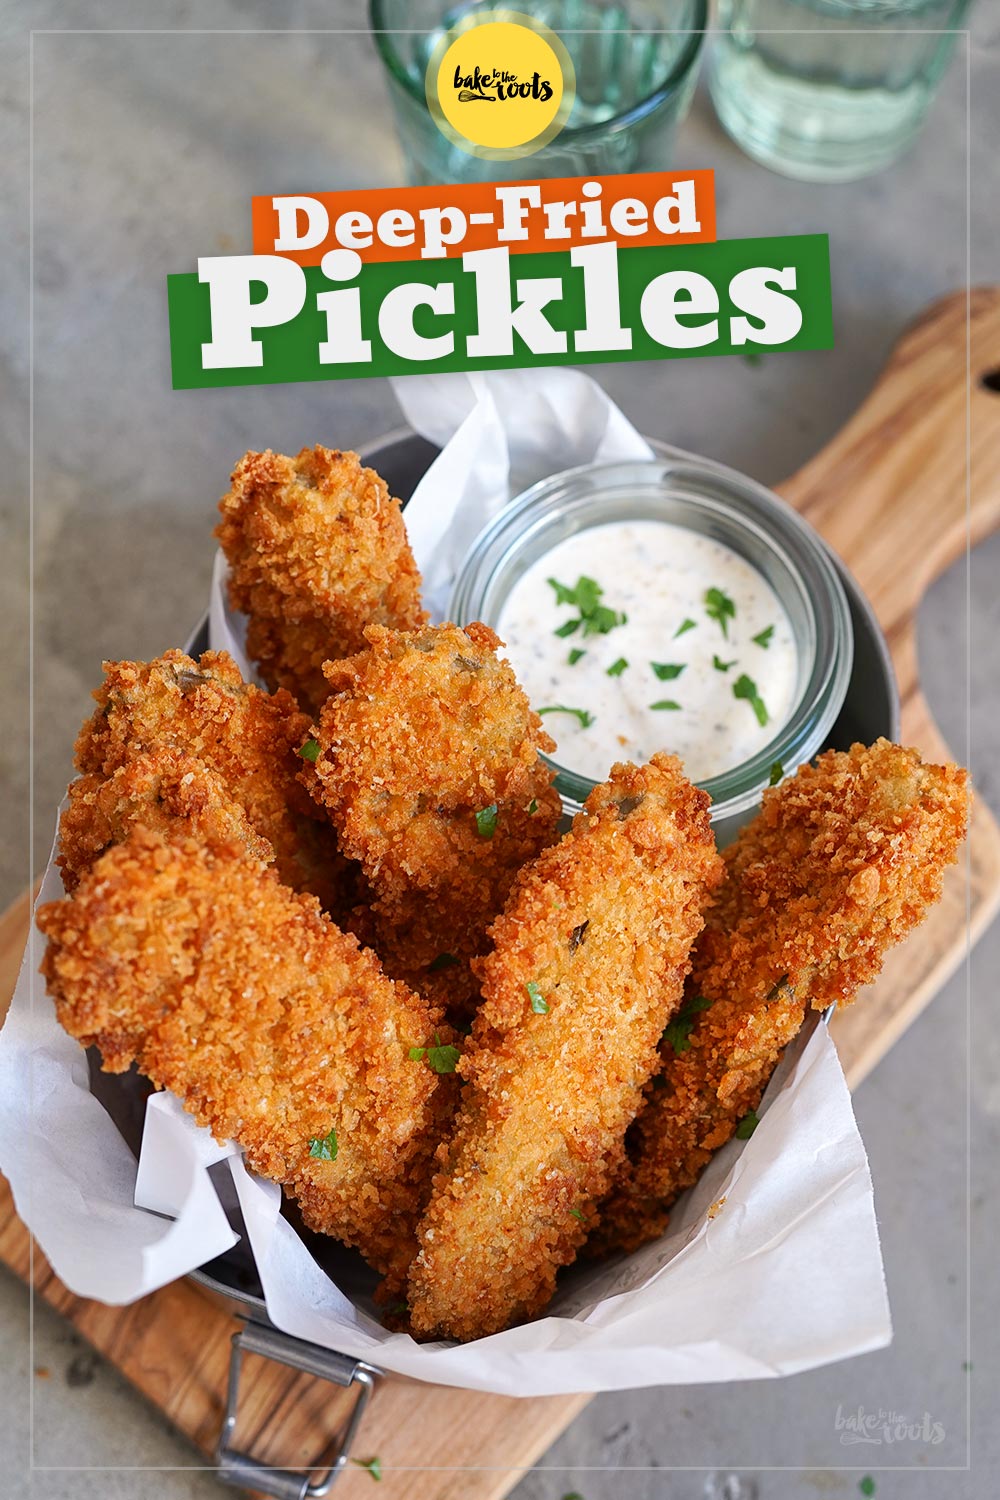 Deep-Fried Pickles mit Ranch Dip | Bake to the roots